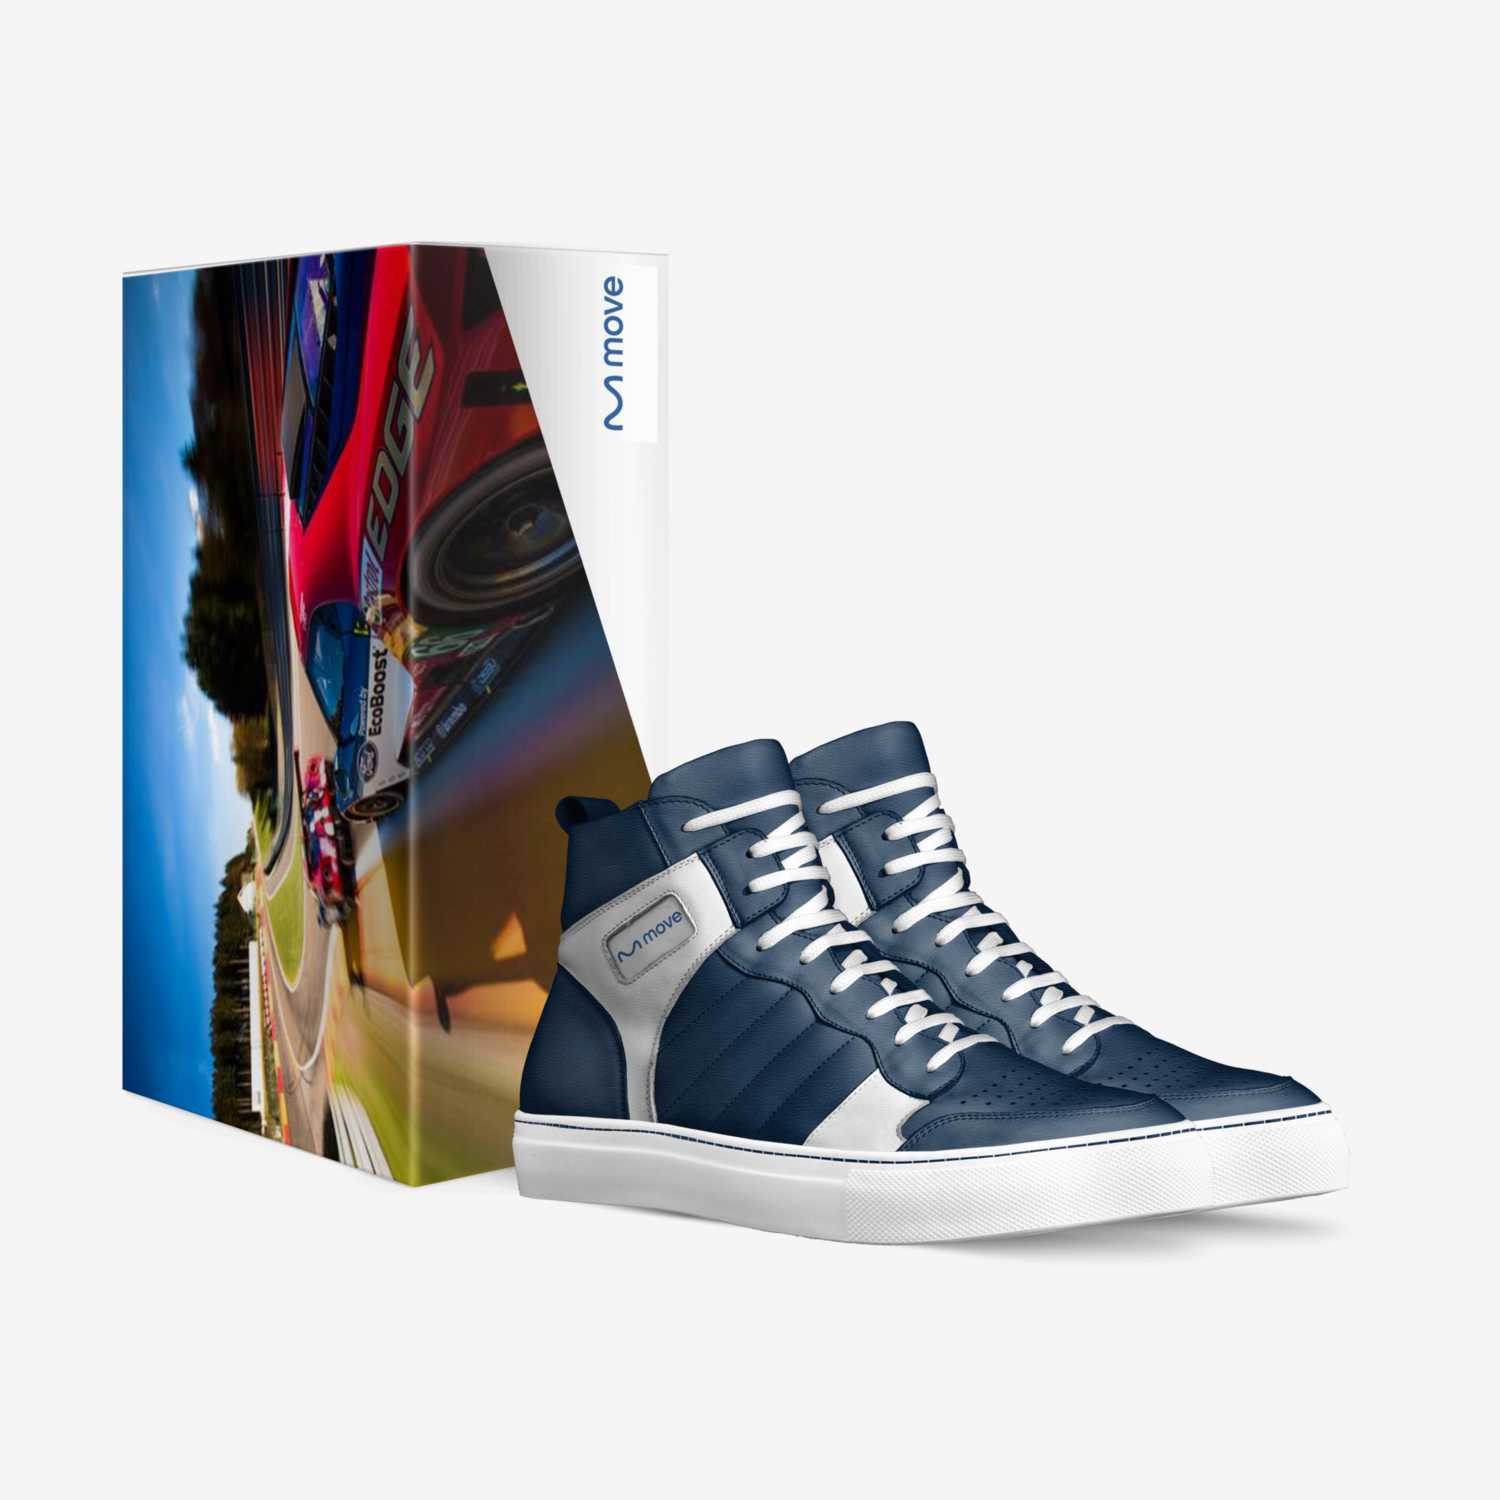 Move custom made in Italy shoes by Andy vande Voorde | Box view